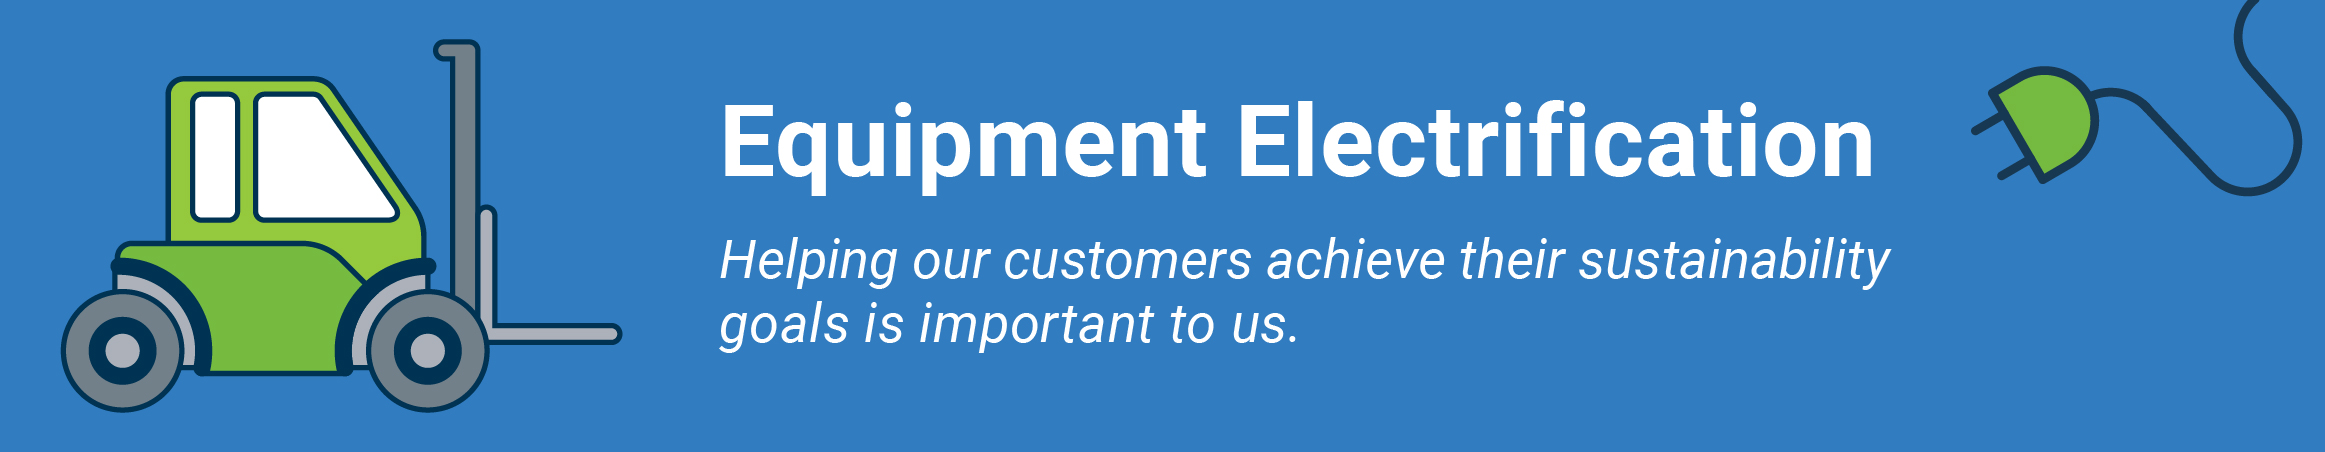 Business Equipment Electrification - helping our customers achieve their sustainability goals is important to us